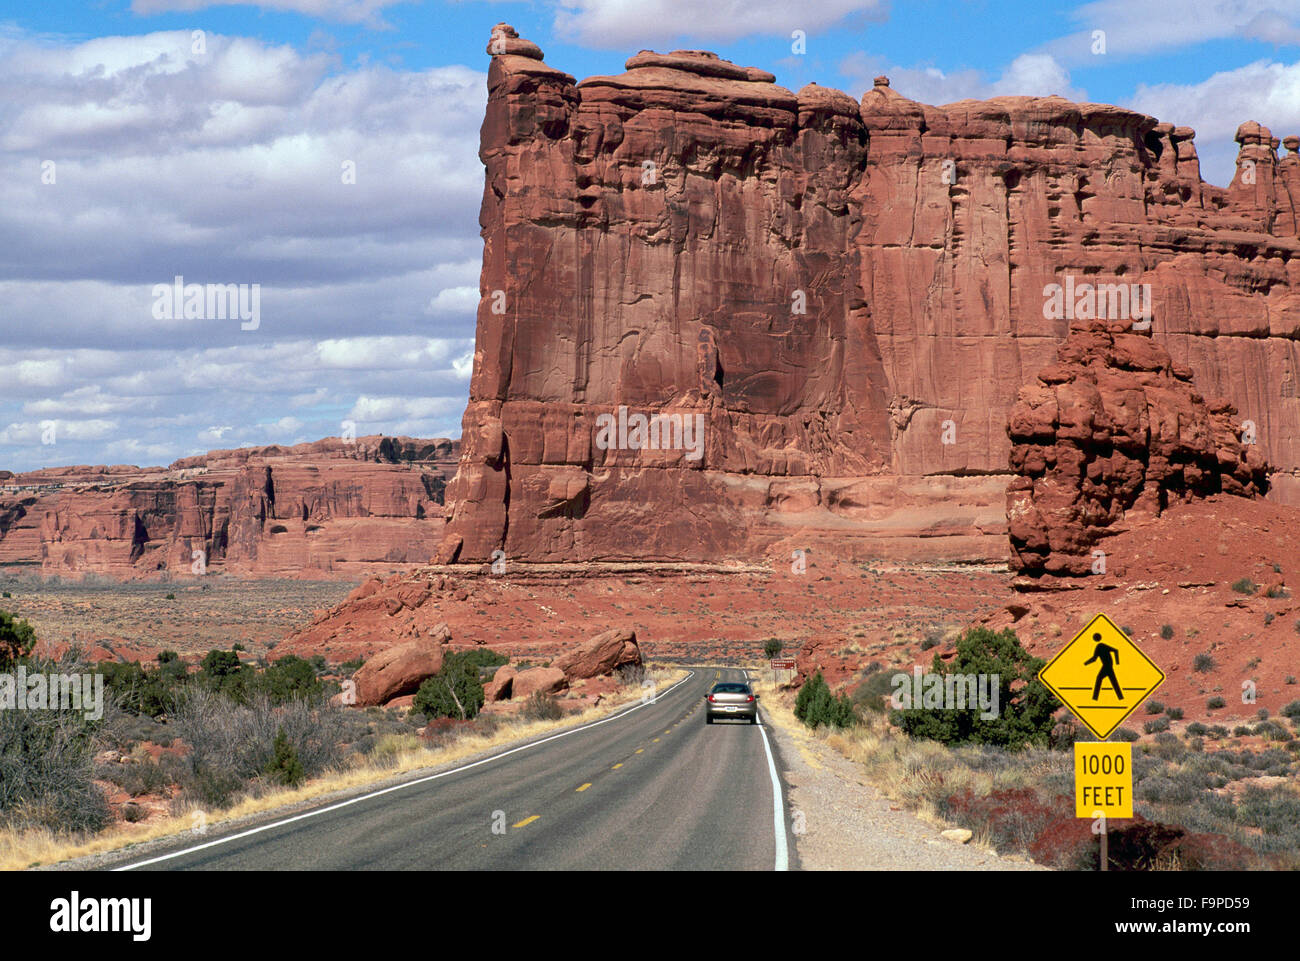 Arches National Park, Utah USA - Tower of Babel, Courthouse Towers, Scenic Drive through Sandstone Rock Formations Stock Photo